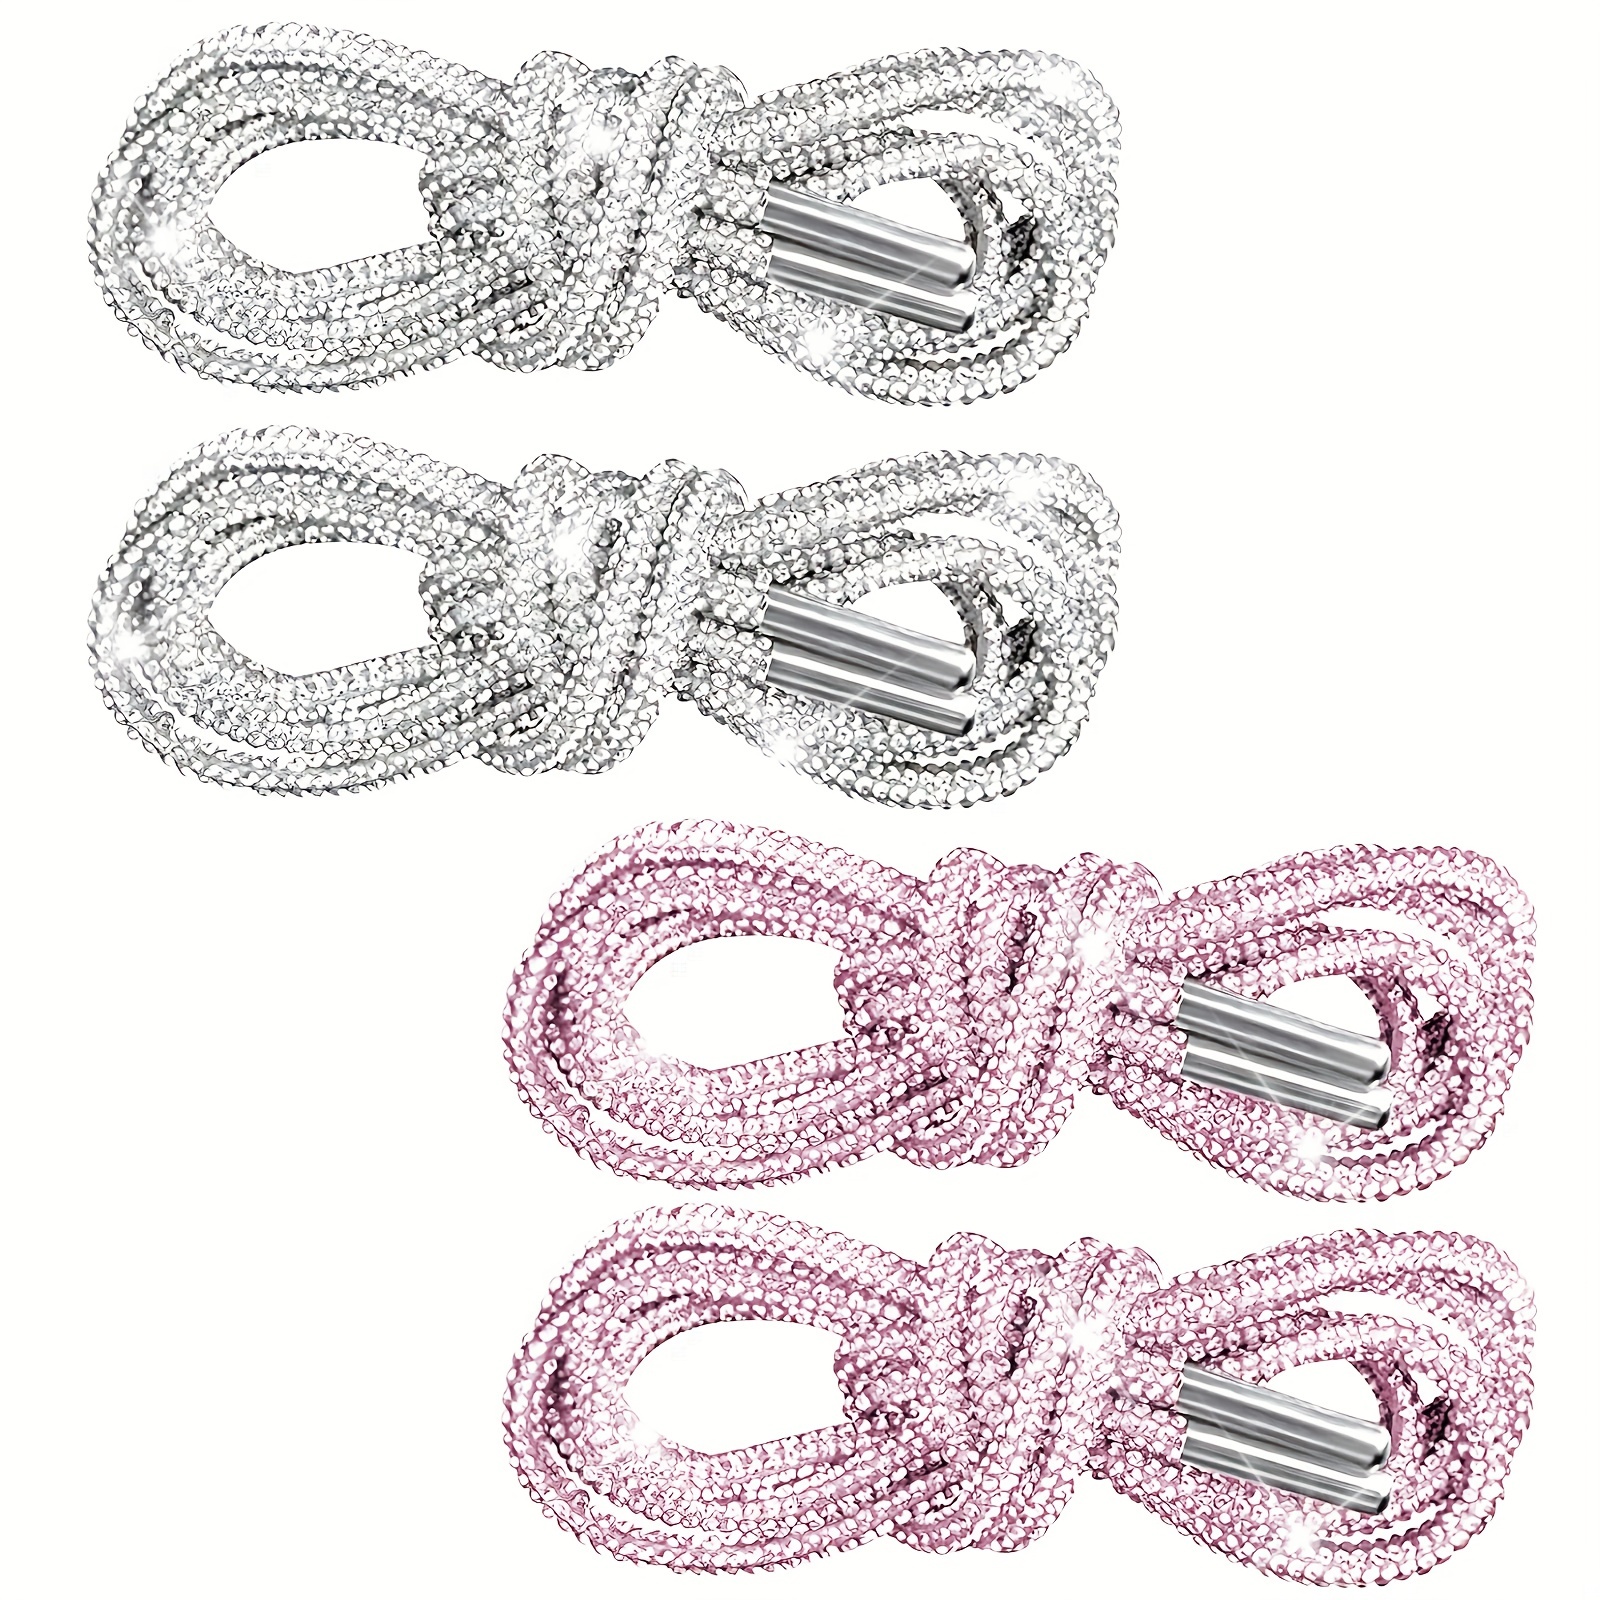 4 Pcs Rhinestone Glitter 55'' Shoelaces Crystal Shoe Laces Bling Bling Drawstring Cords Replacement Shiny Round Shoe Laces